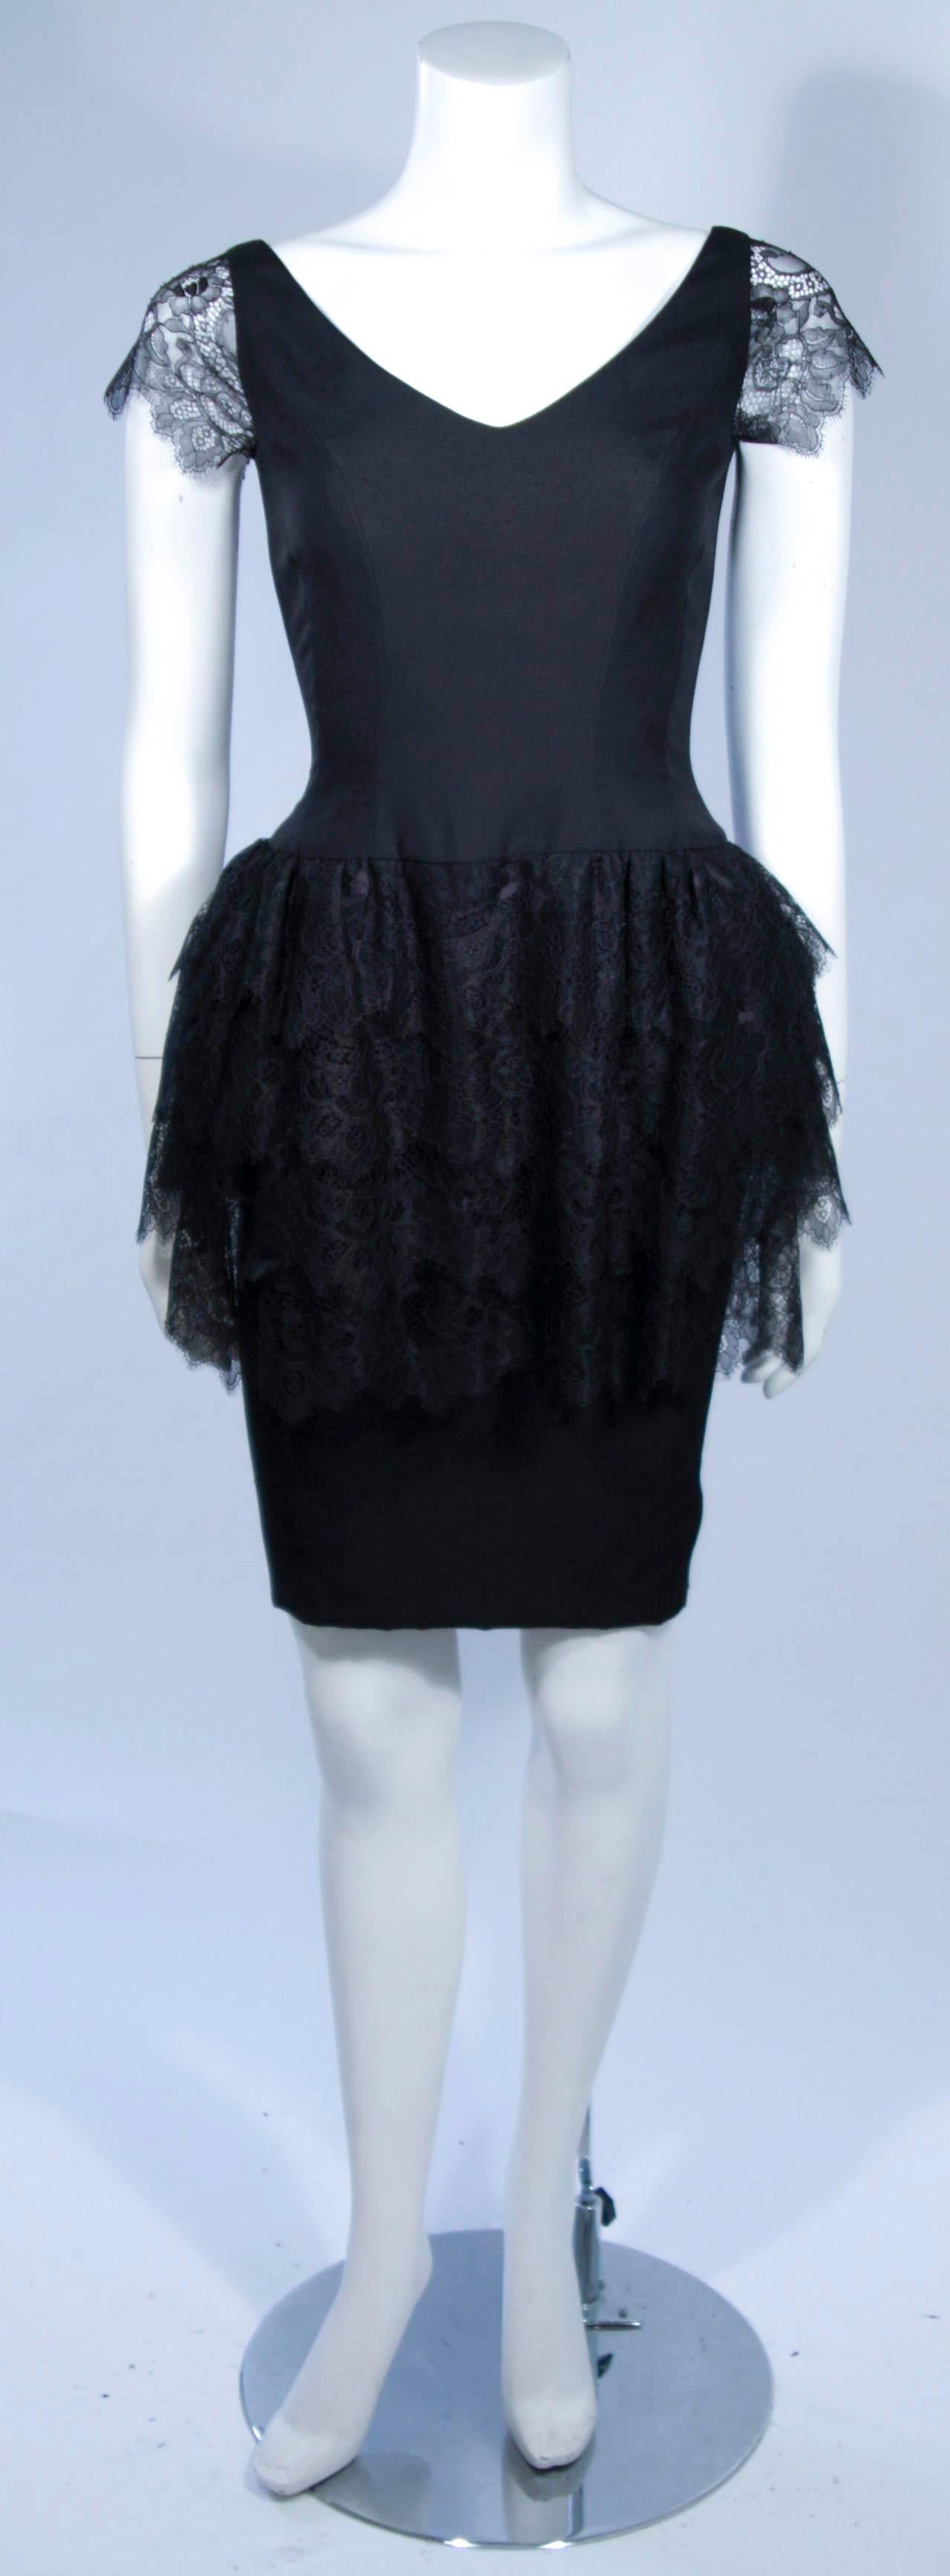 Black Elizabeth Mason Couture Silk & Lace Cocktail Dress size 2 (or made to measure) For Sale